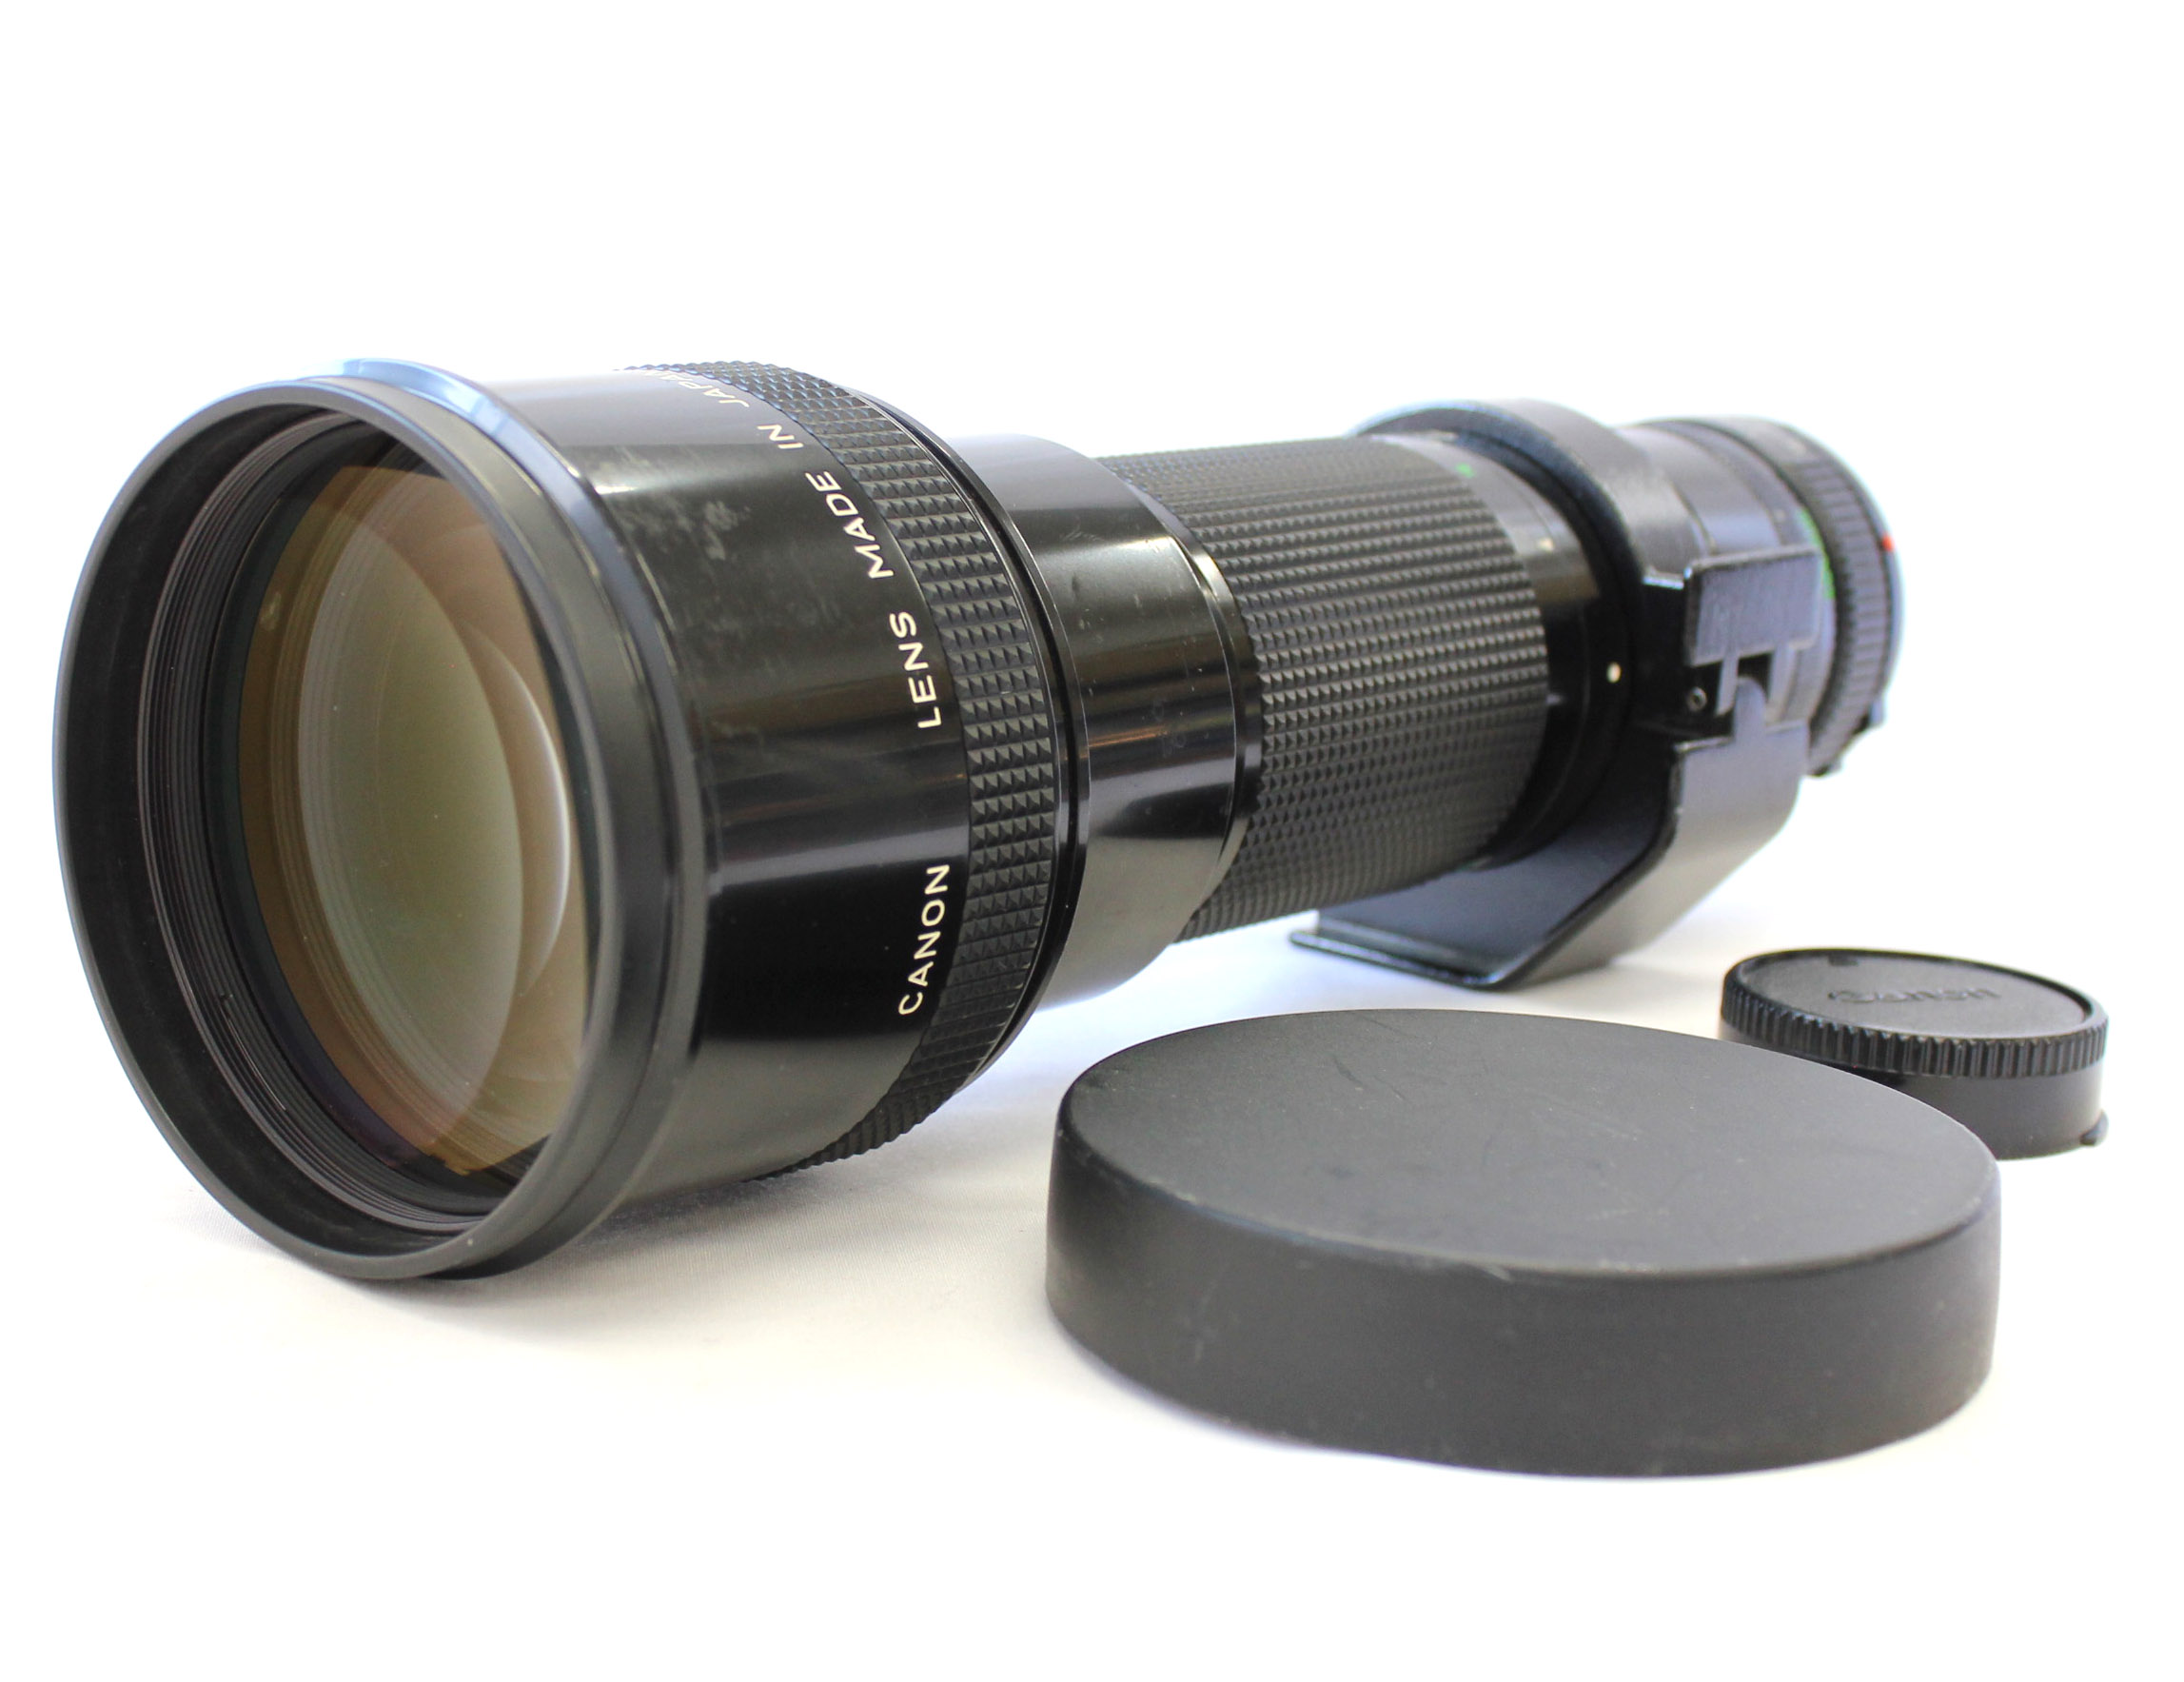 Japan Used Camera Shop | [Excellent+++++] Canon New FD NFD 400mm F/4.5 Telephoto MF Lens from Japan